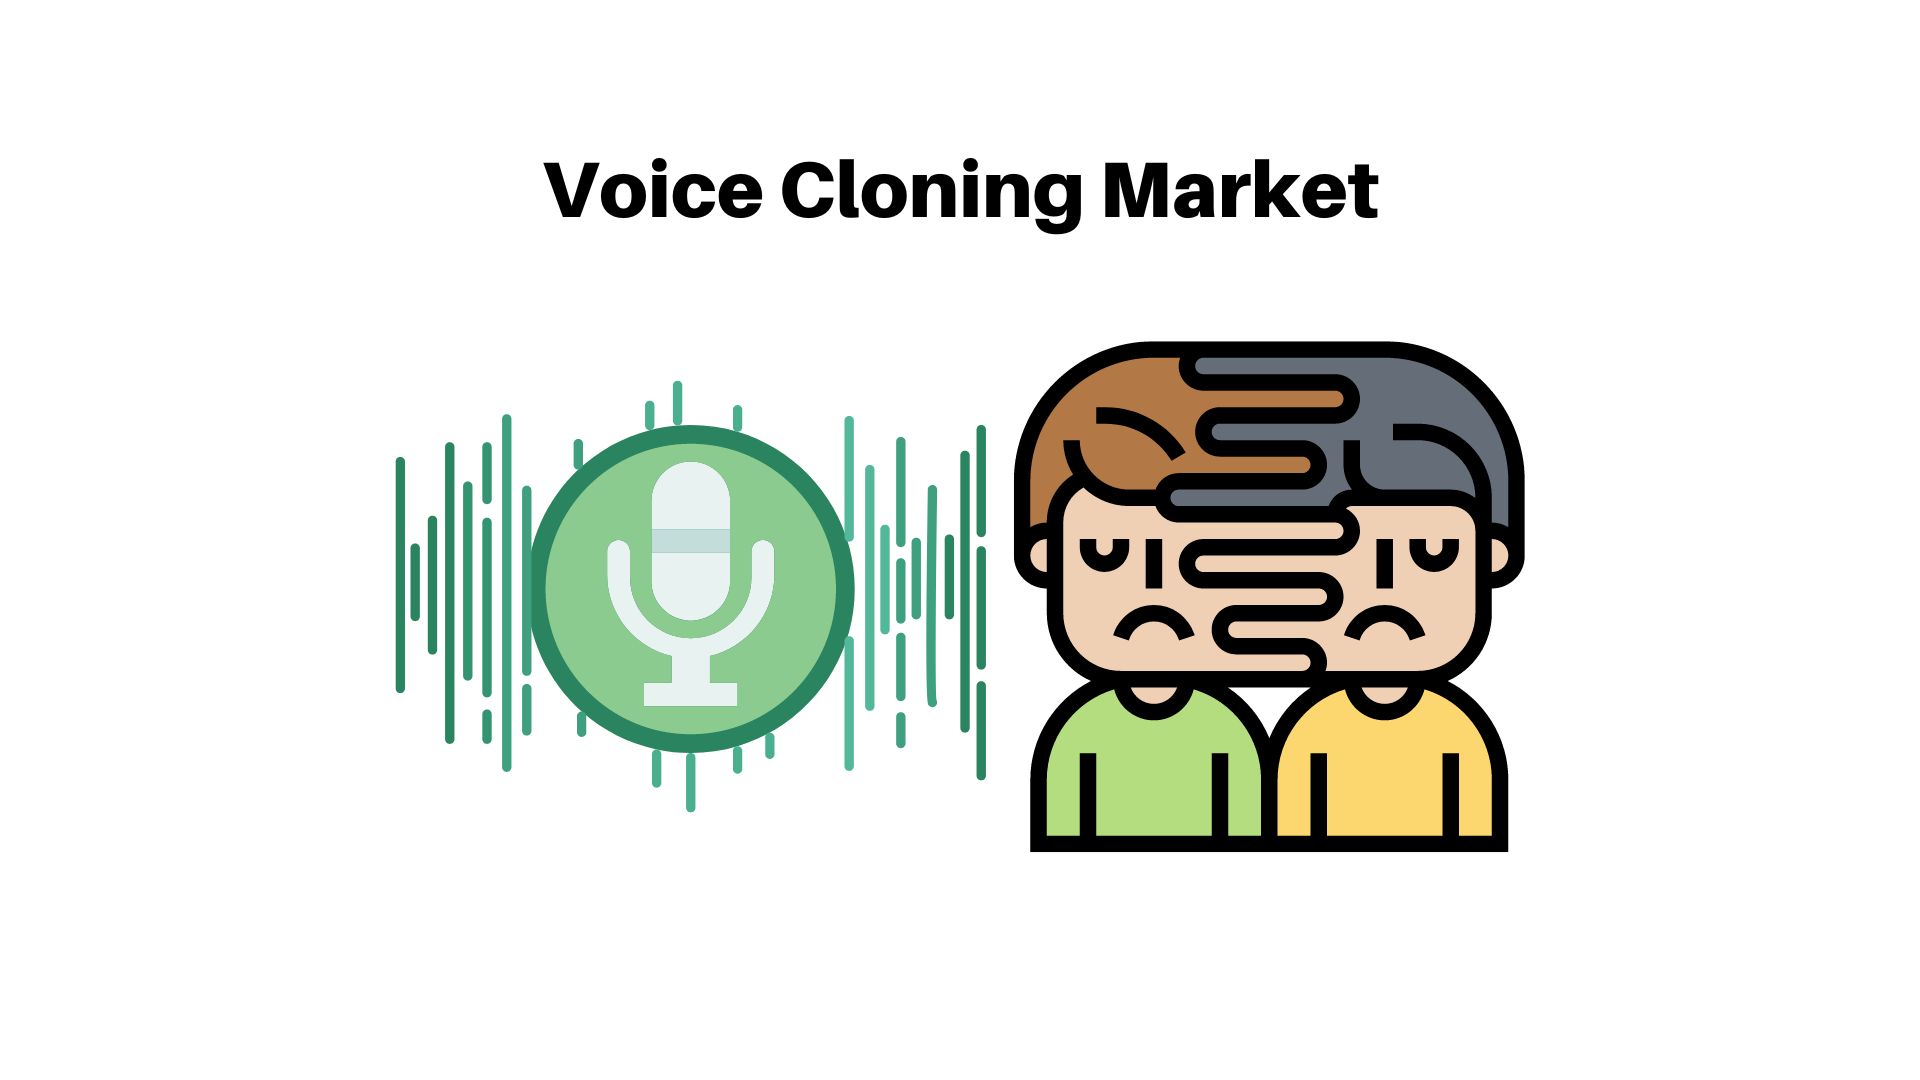 Global Voice Cloning Market is expected to reach USD 26.59 Bn in 2033